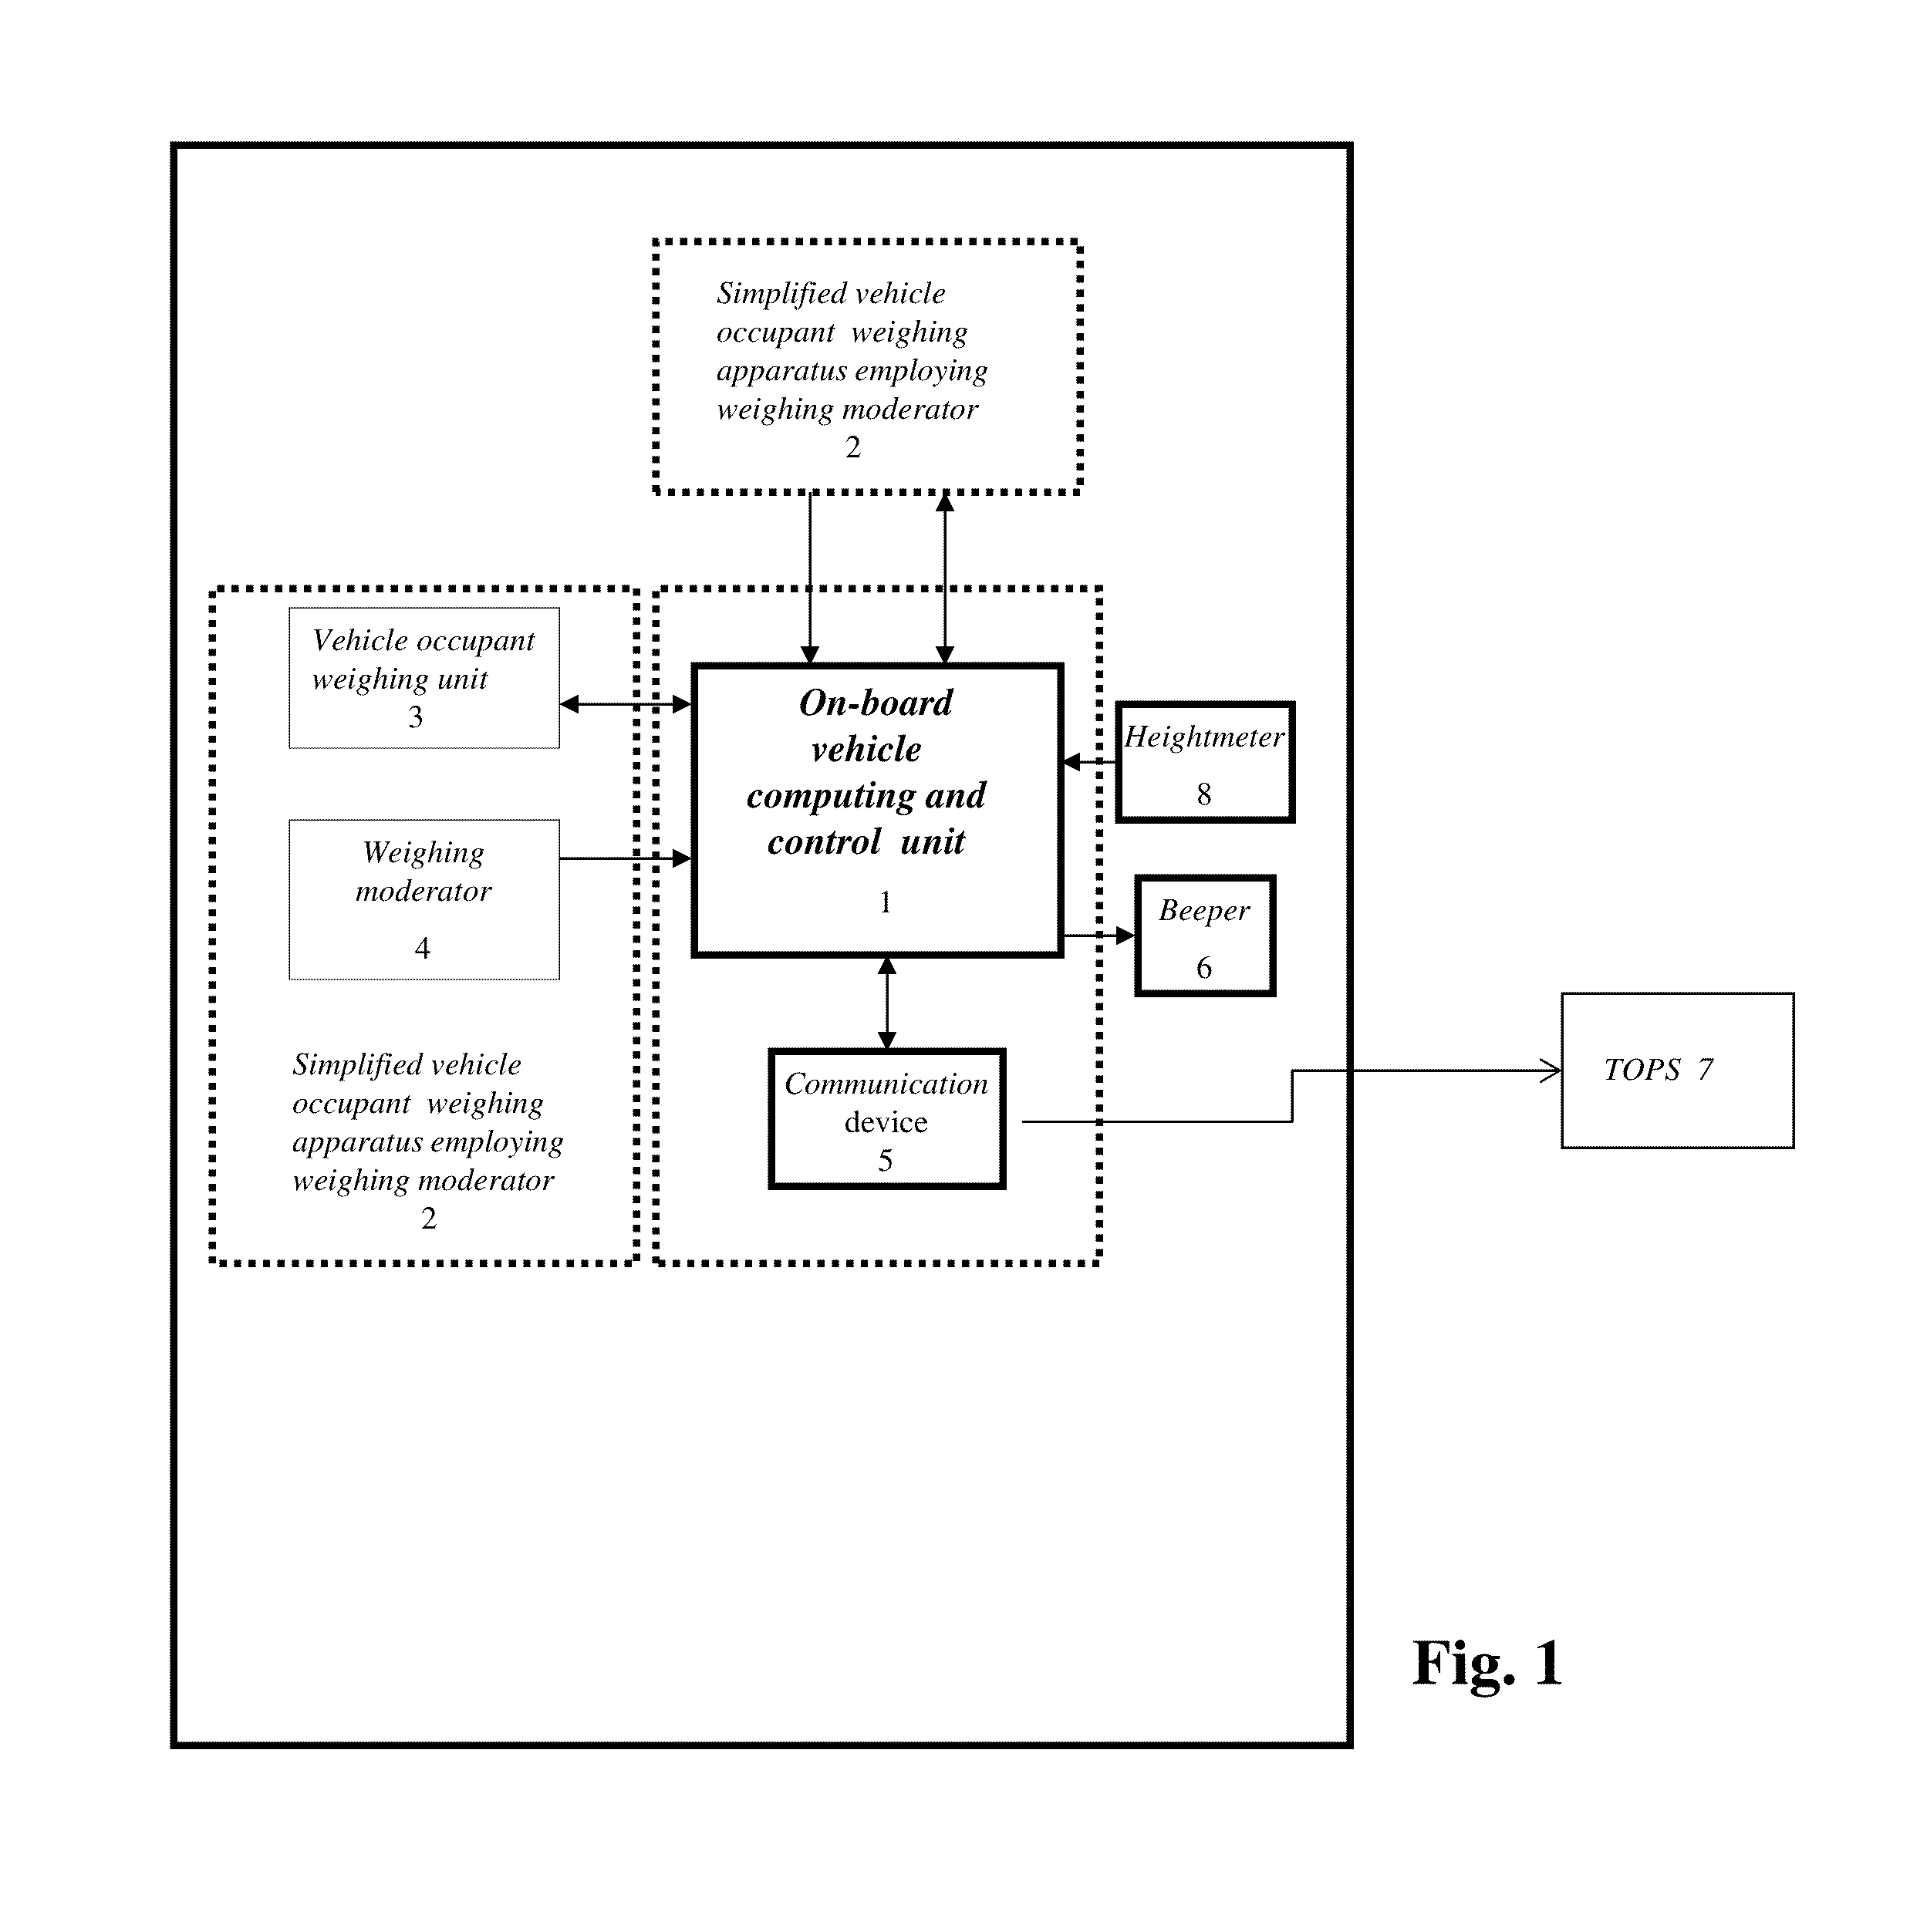 Technology and methods of on-board vehicle occupant accurate weighing by a simplified weighing apparatus based on weighing moderator and its applications in on-board occupant weighing systems